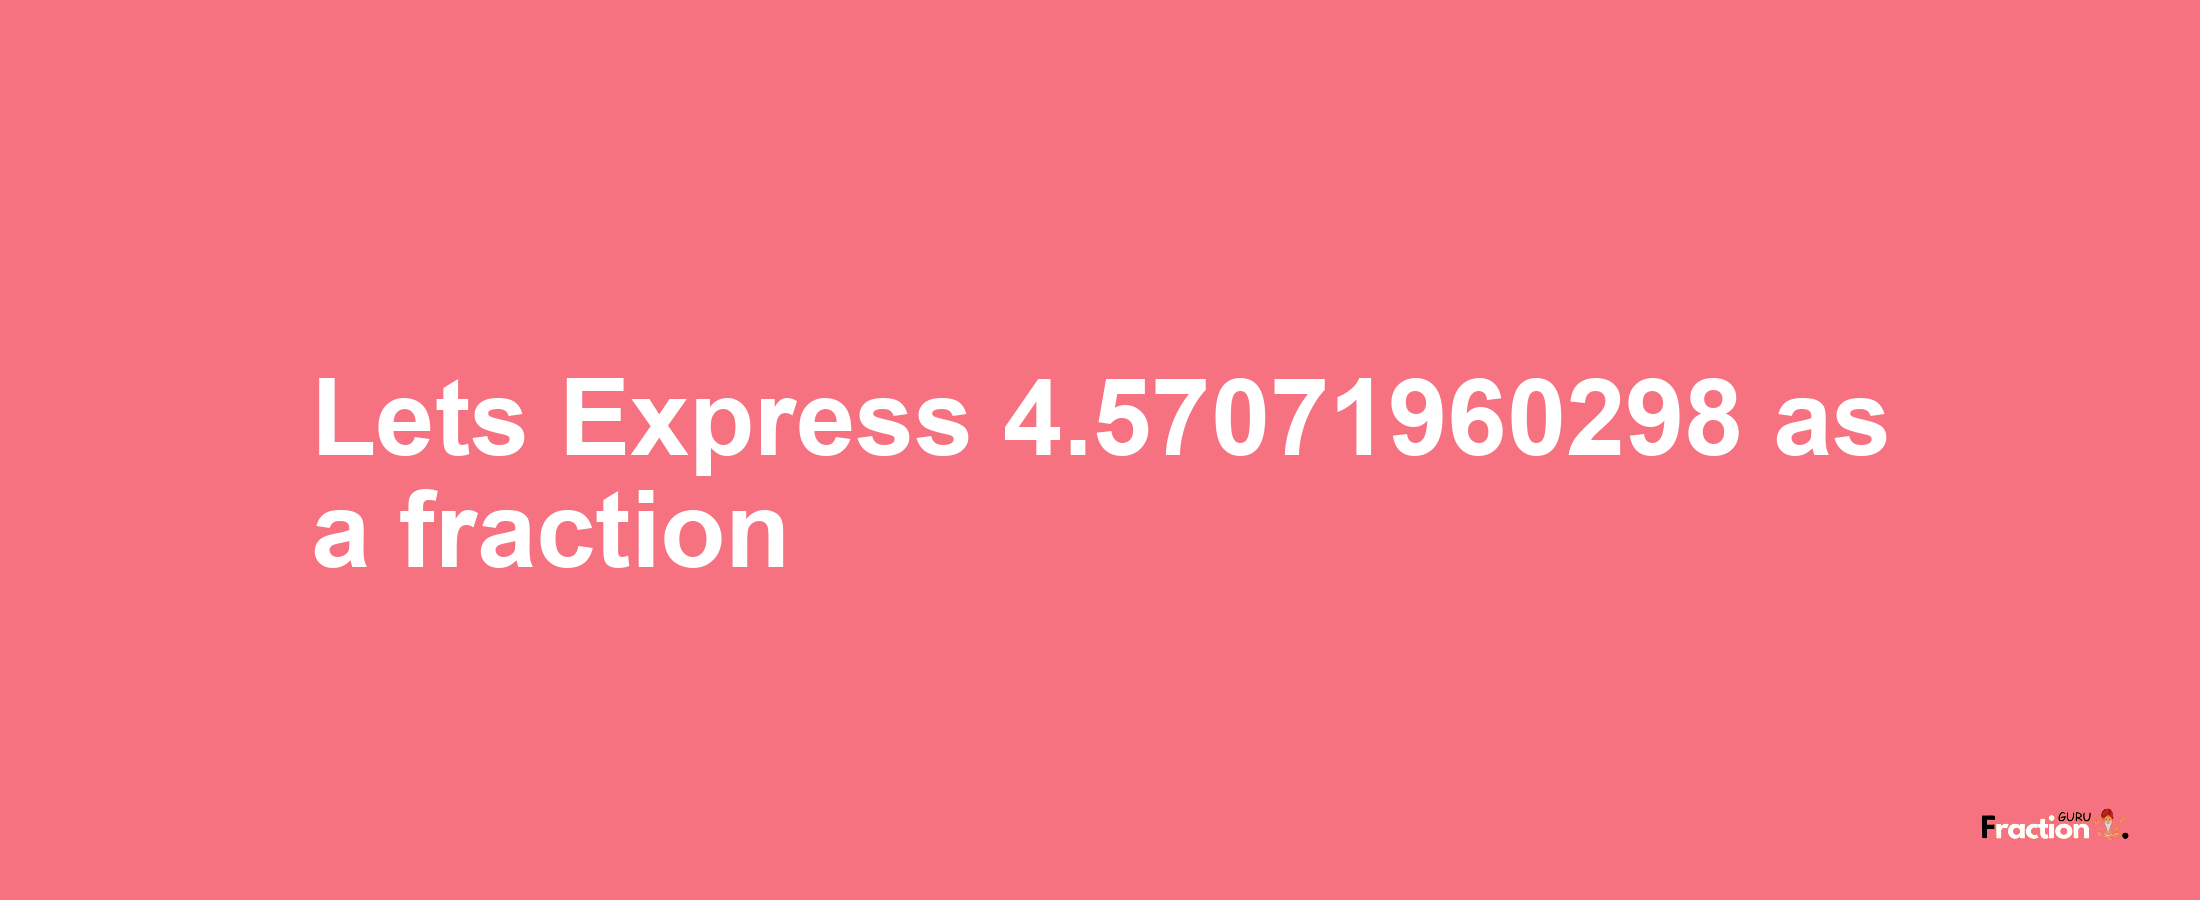 Lets Express 4.57071960298 as afraction